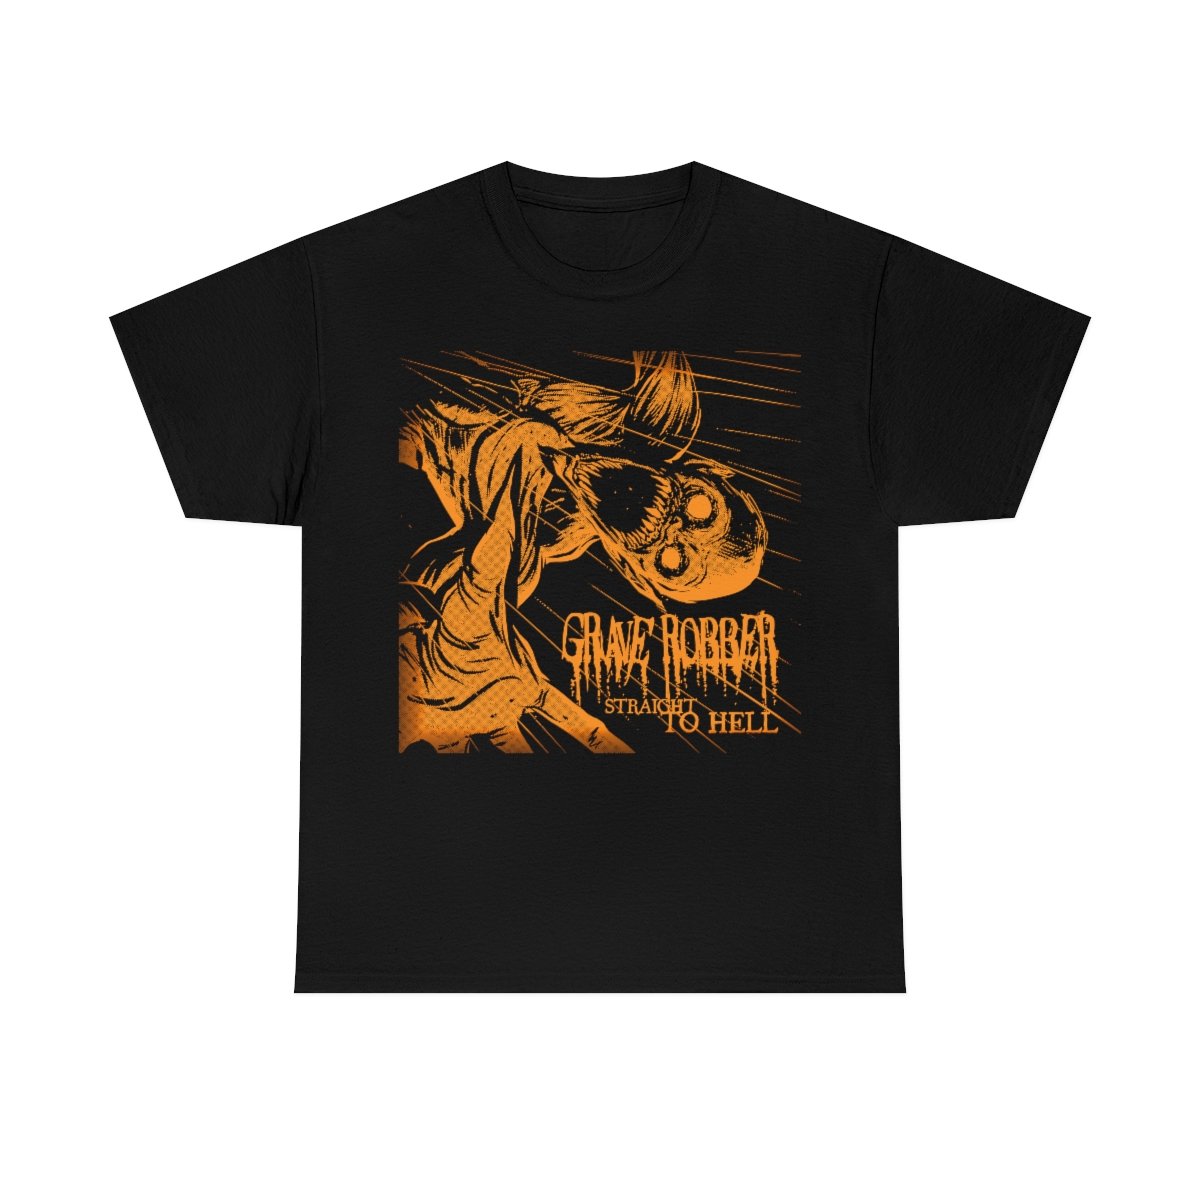 Grave Robber Straight to Hell (Limited Edition Orange) Short Sleeve Tshirt (5000)